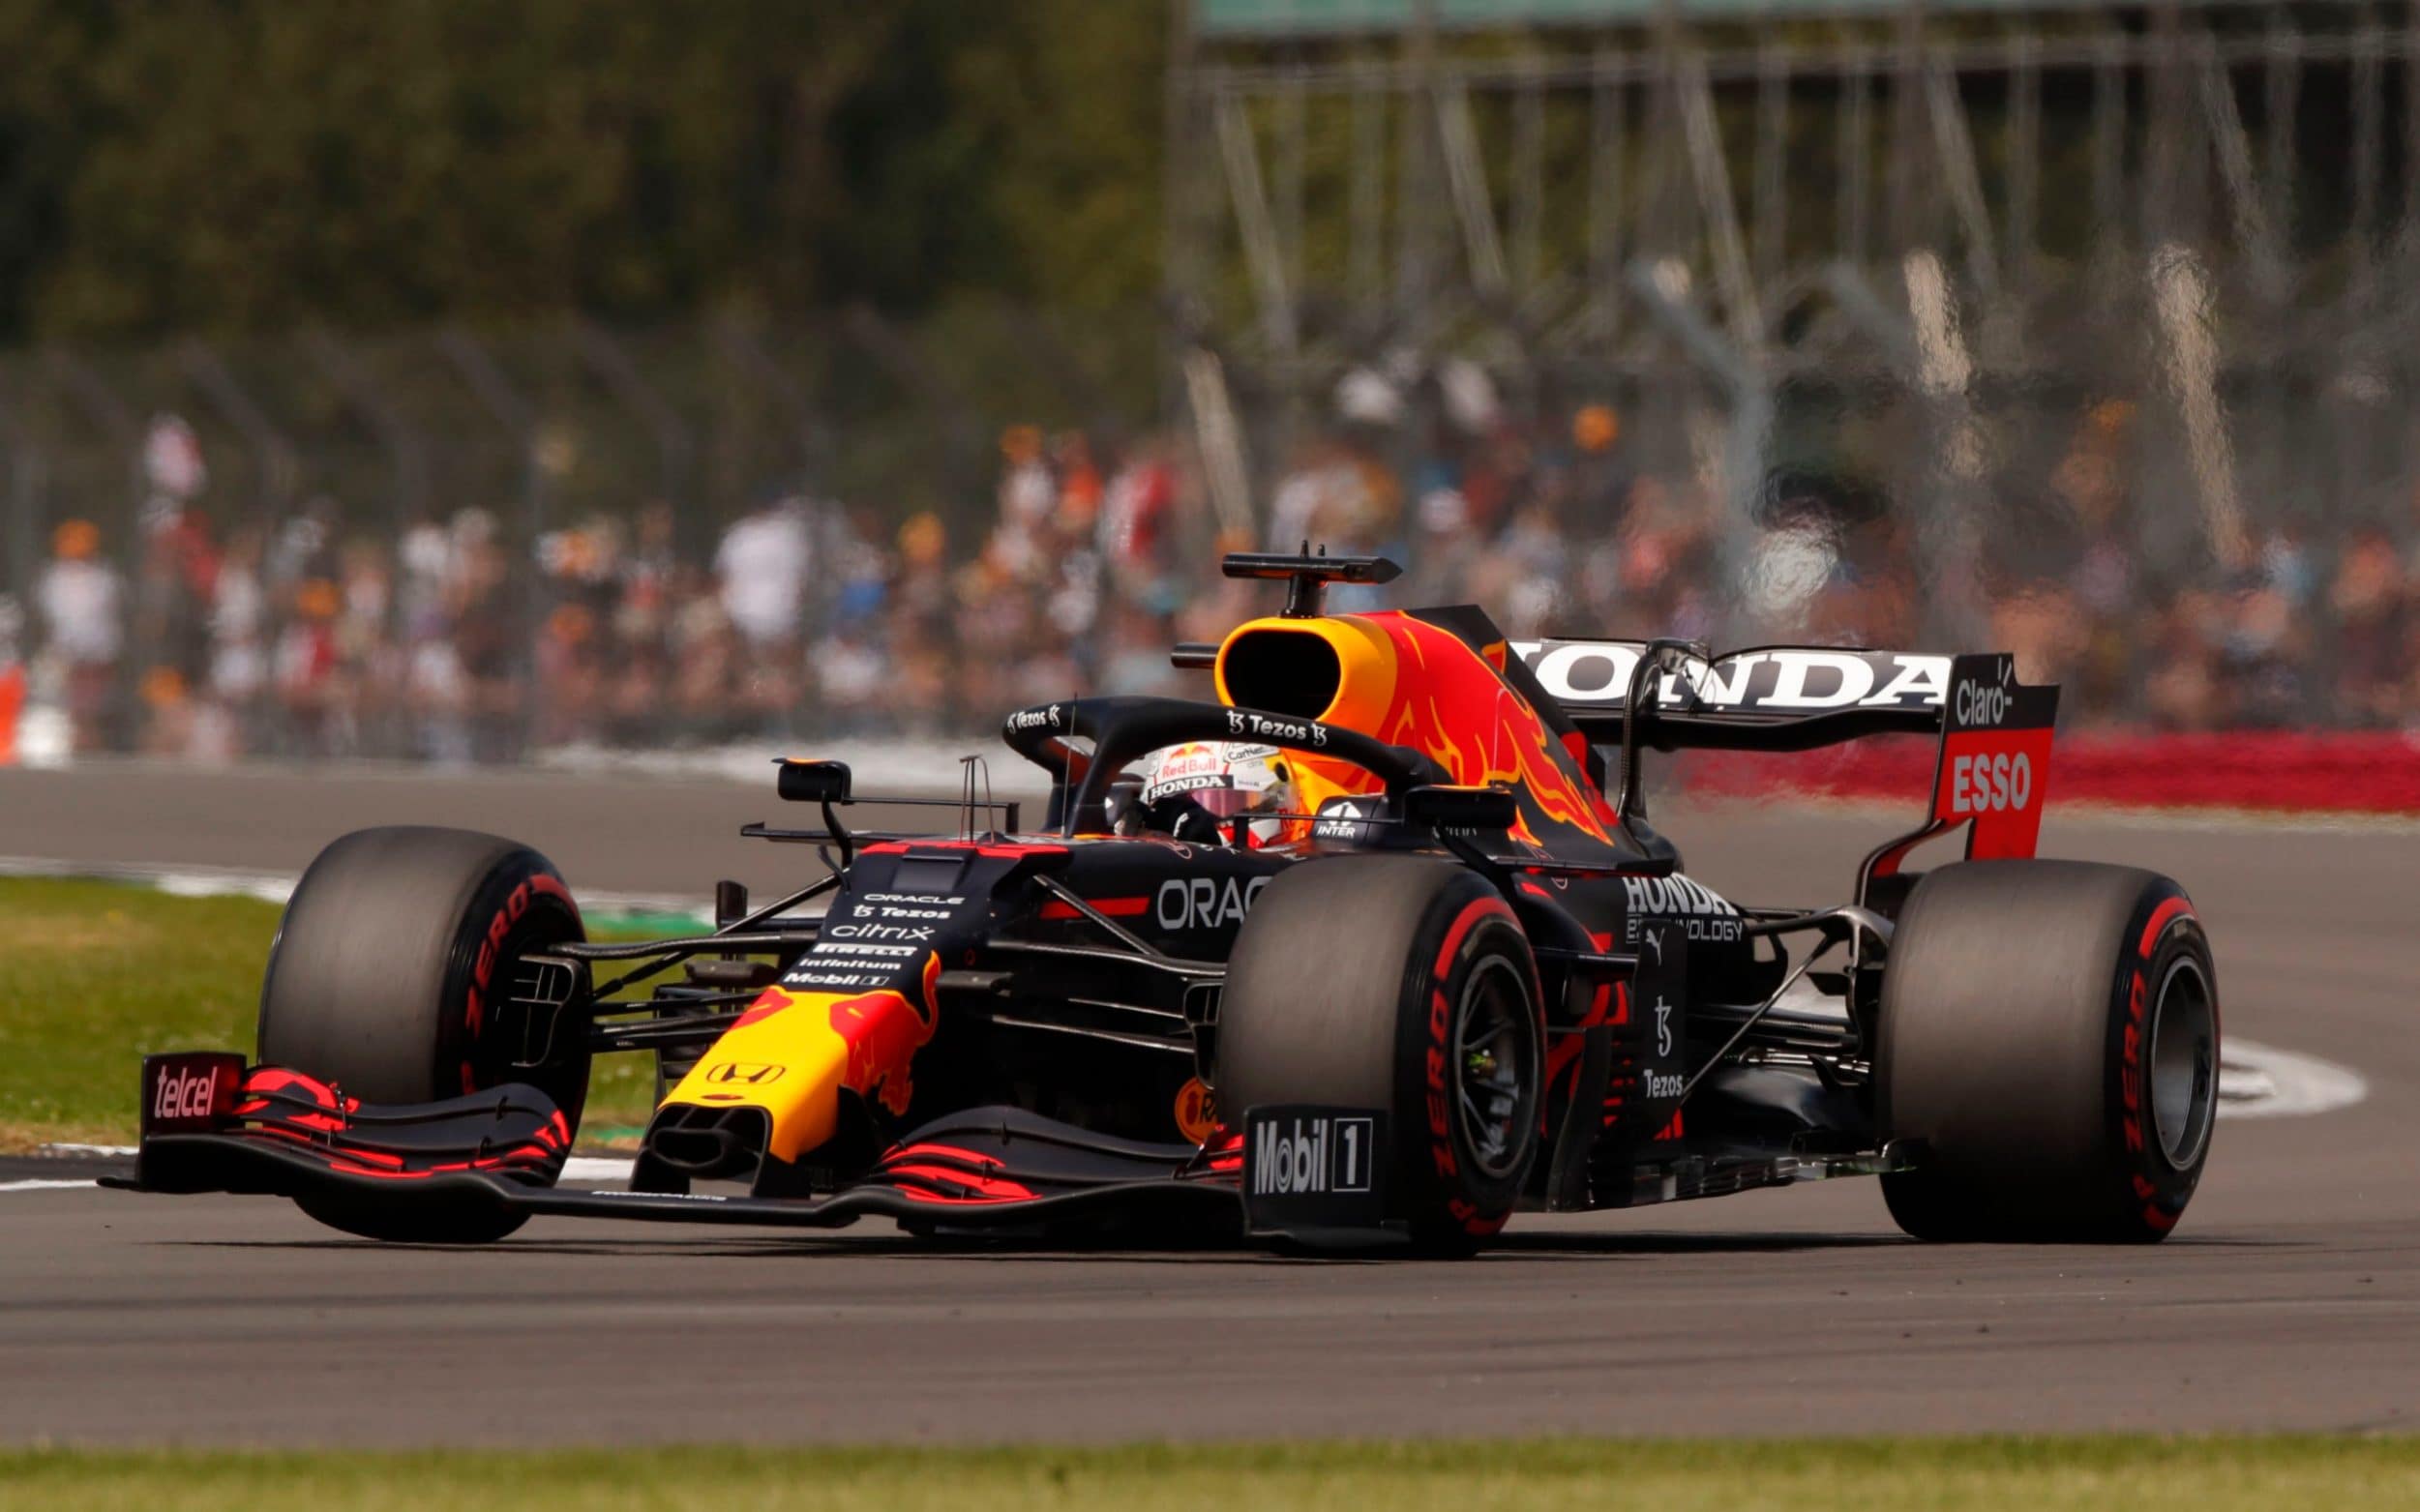 Verstappen leads in the only practice session before quali